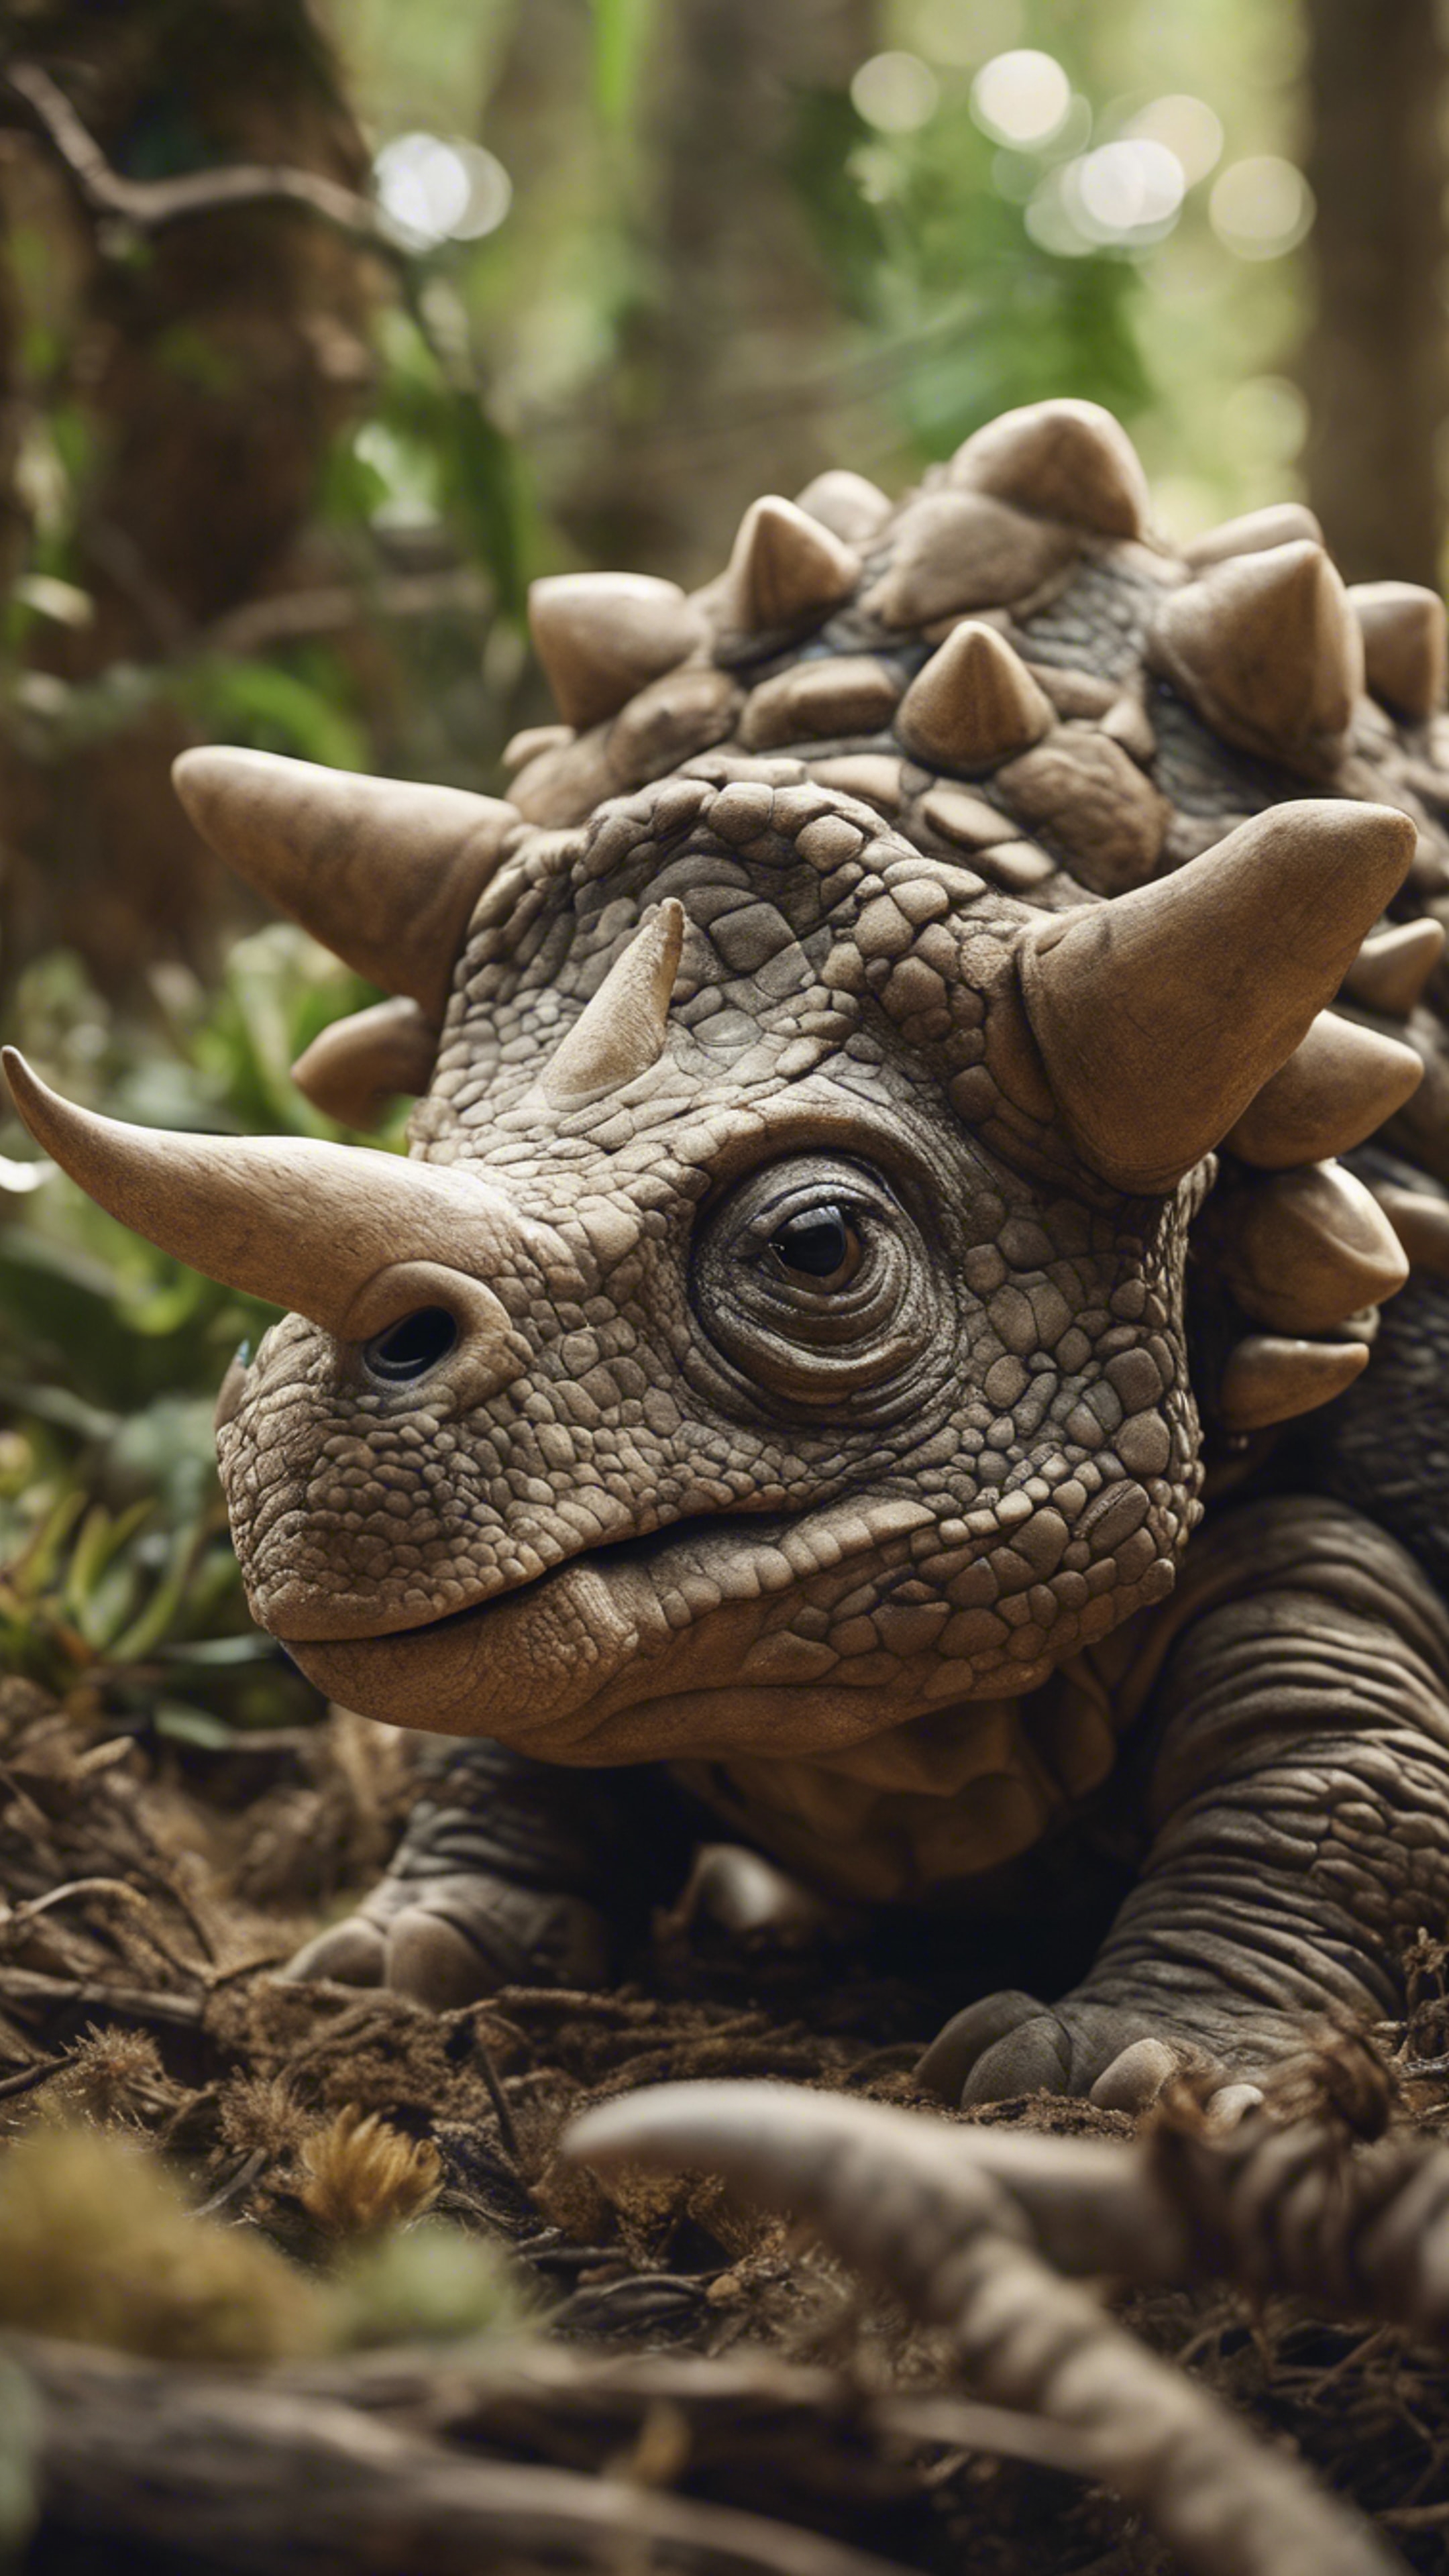 A nest full of baby Triceratops sleeping peacefully under the watchful eyes of their mother. Ταπετσαρία[9d947d640cf64dc3ba13]